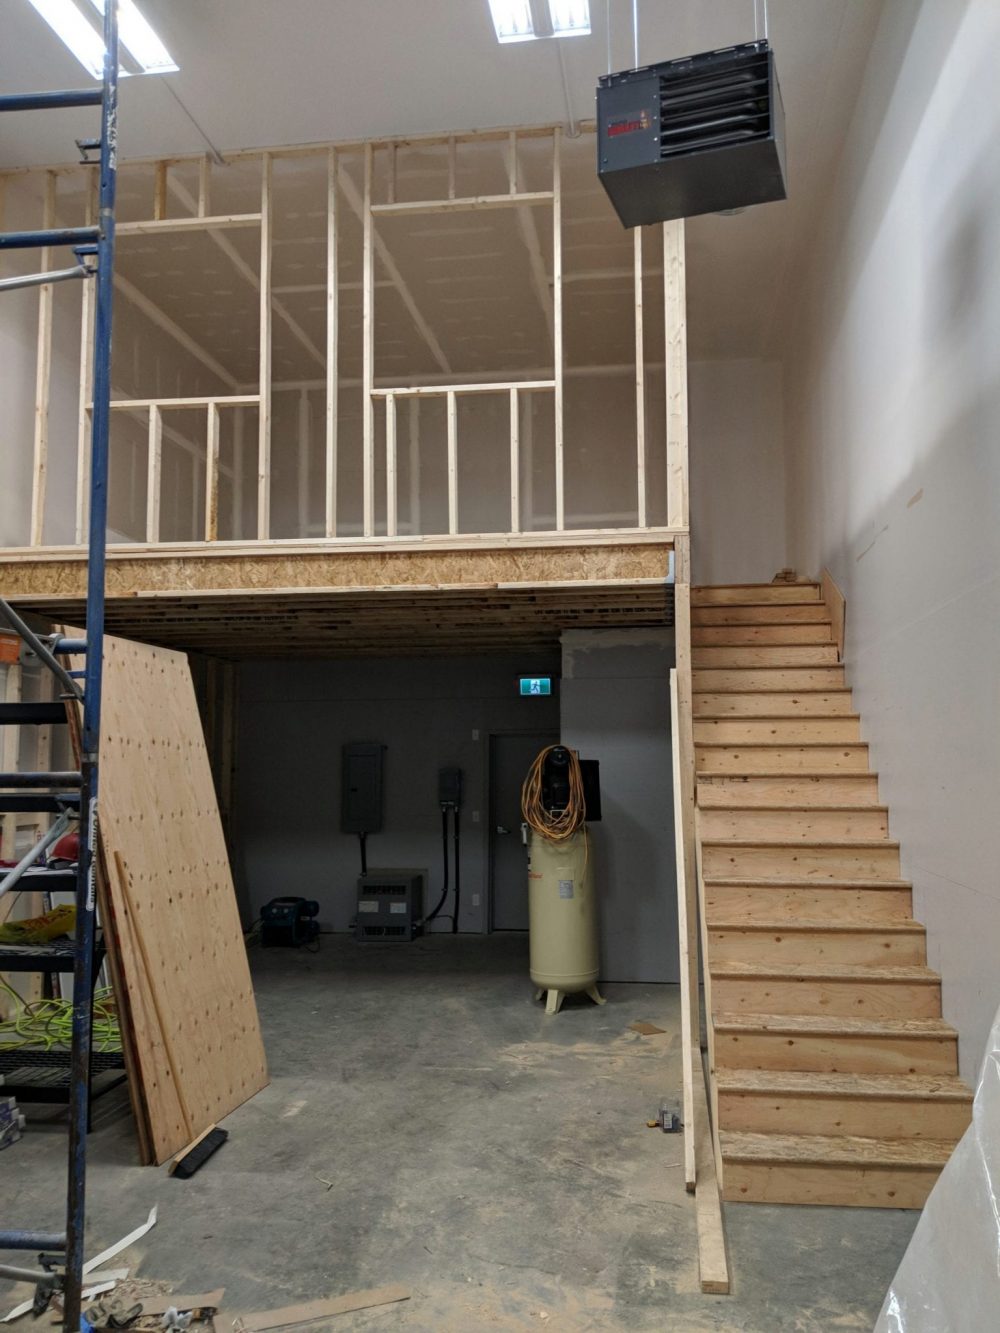 Tenant improvements at commercial bay, mezzanine framing and stairs